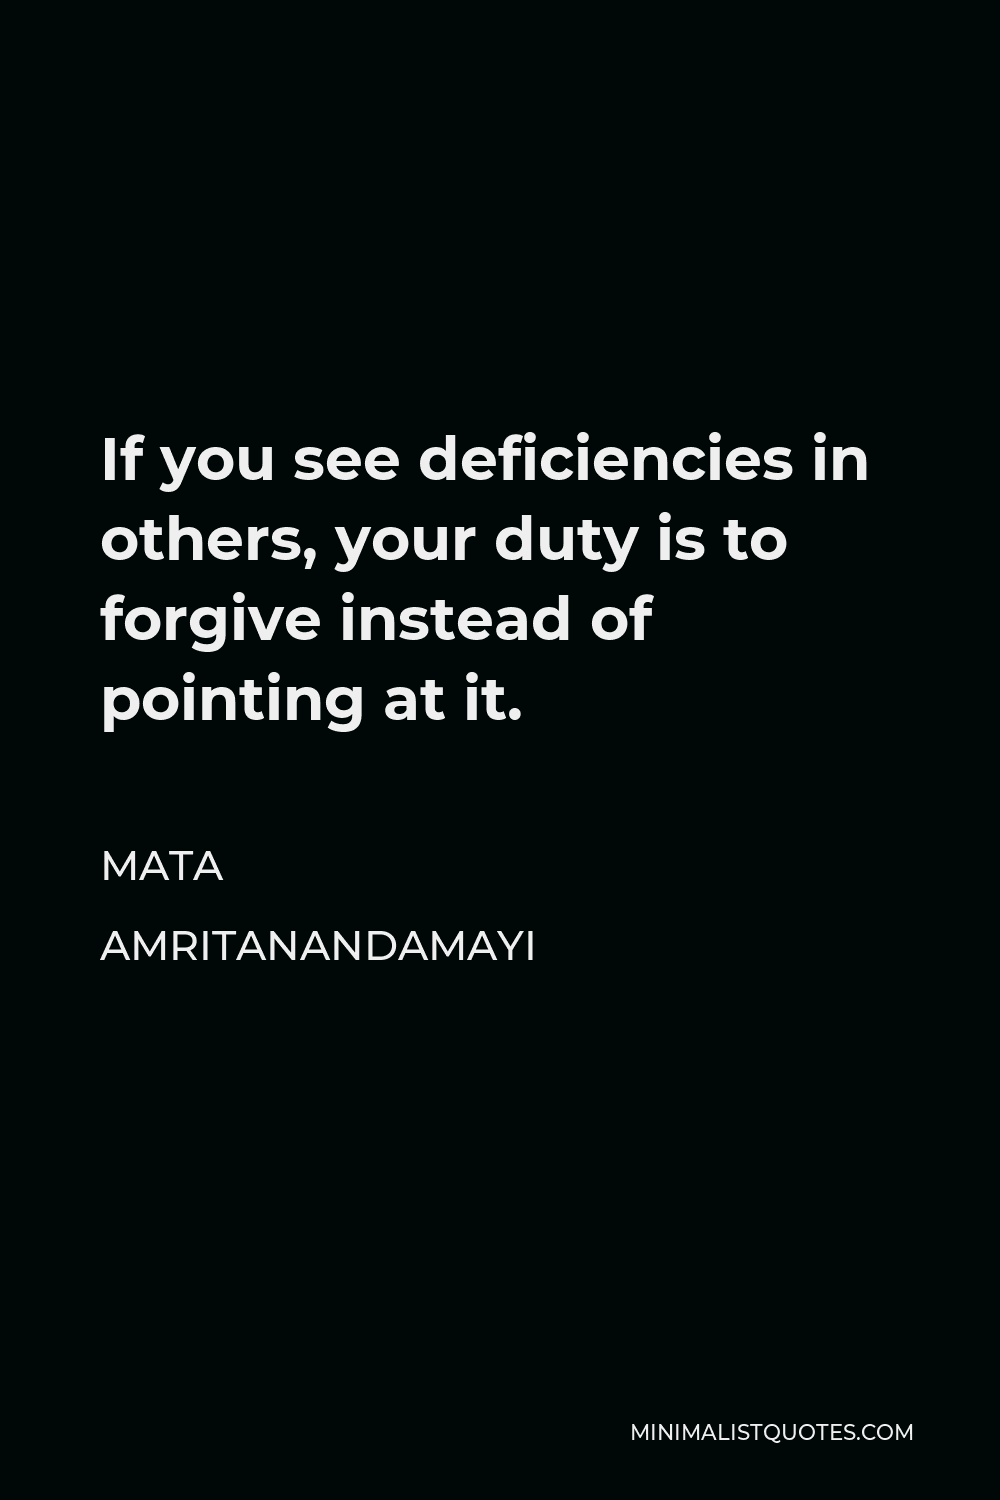 Mata Amritanandamayi Quote - If you see deficiencies in others, your duty is to forgive instead of pointing at it.